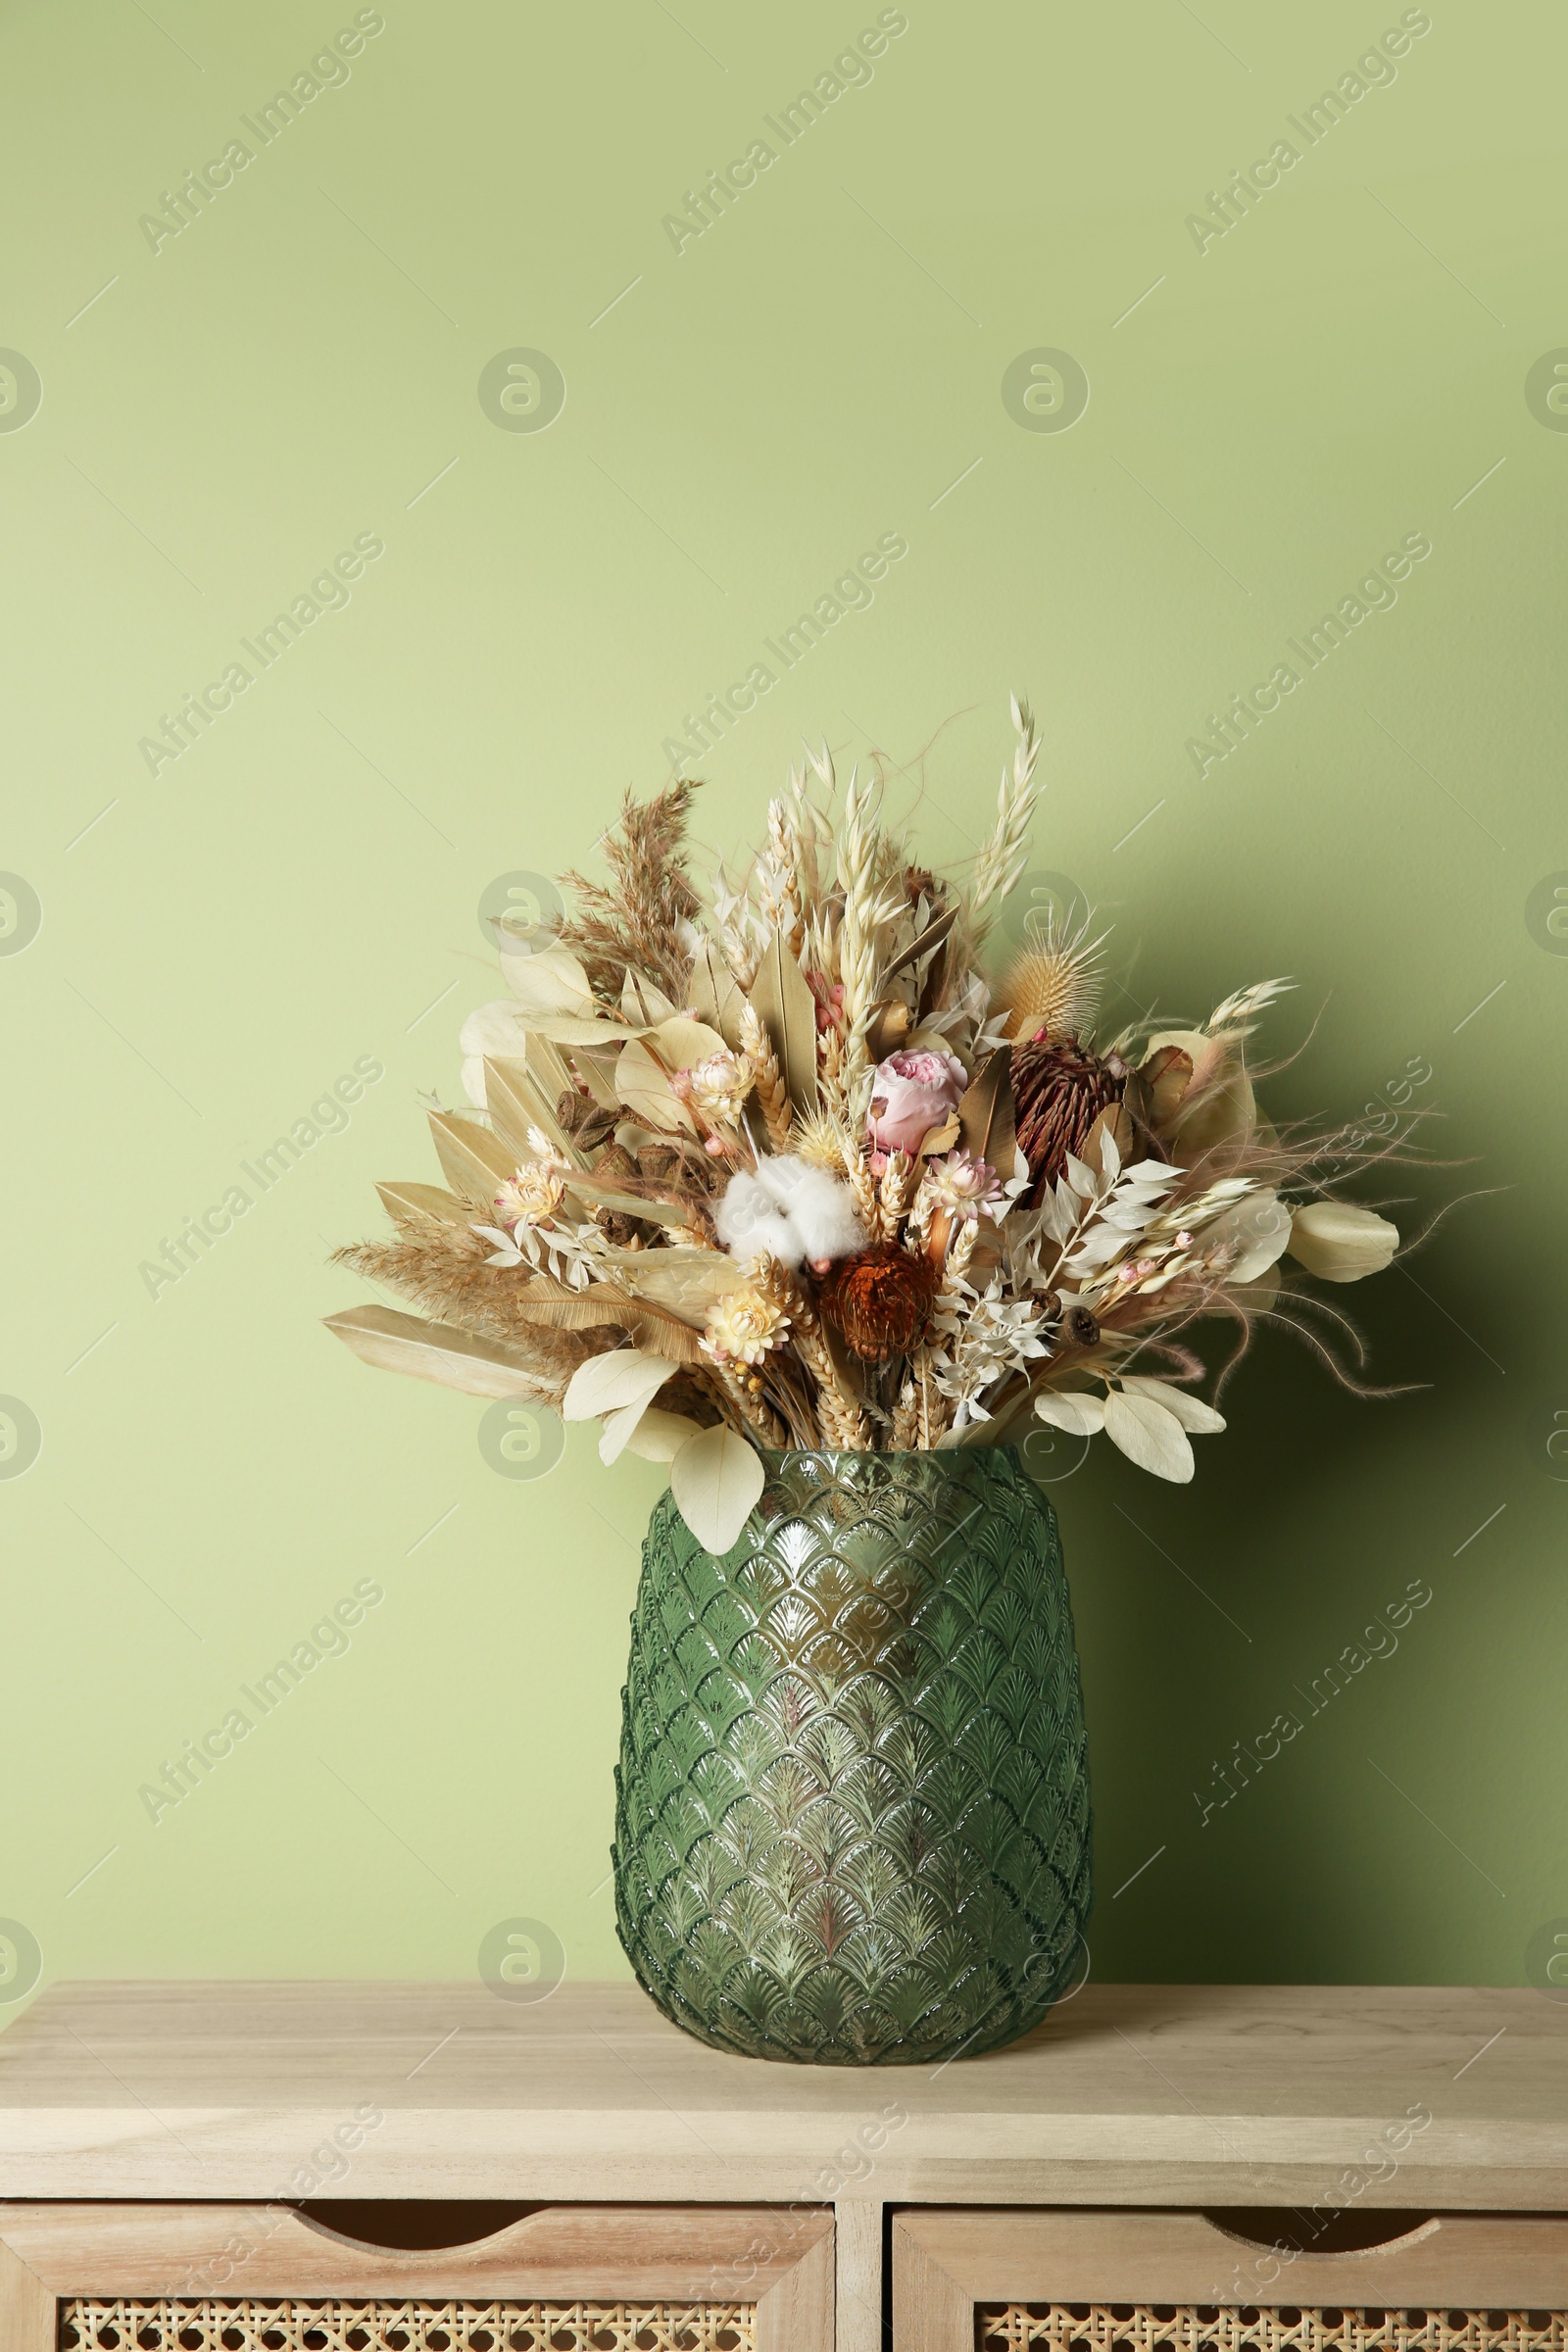 Photo of Beautiful dried flower bouquet in glass vase on wooden table near olive wall